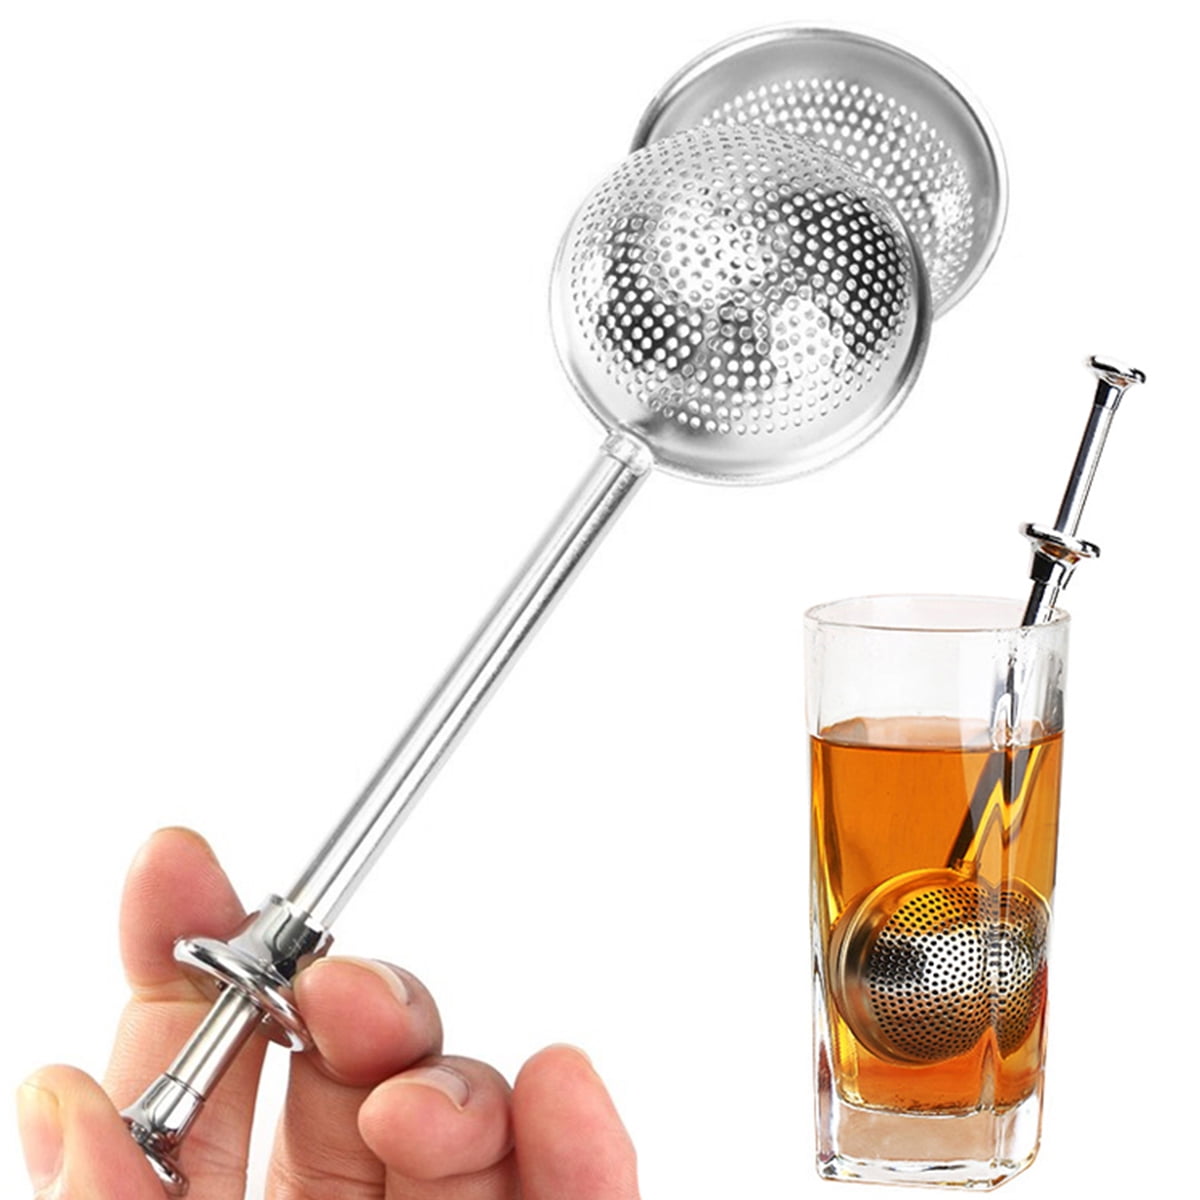 Stainless Steel Tea Spice Ball Mesh Infuser Tea Handle Filter Strainer Diffuser 